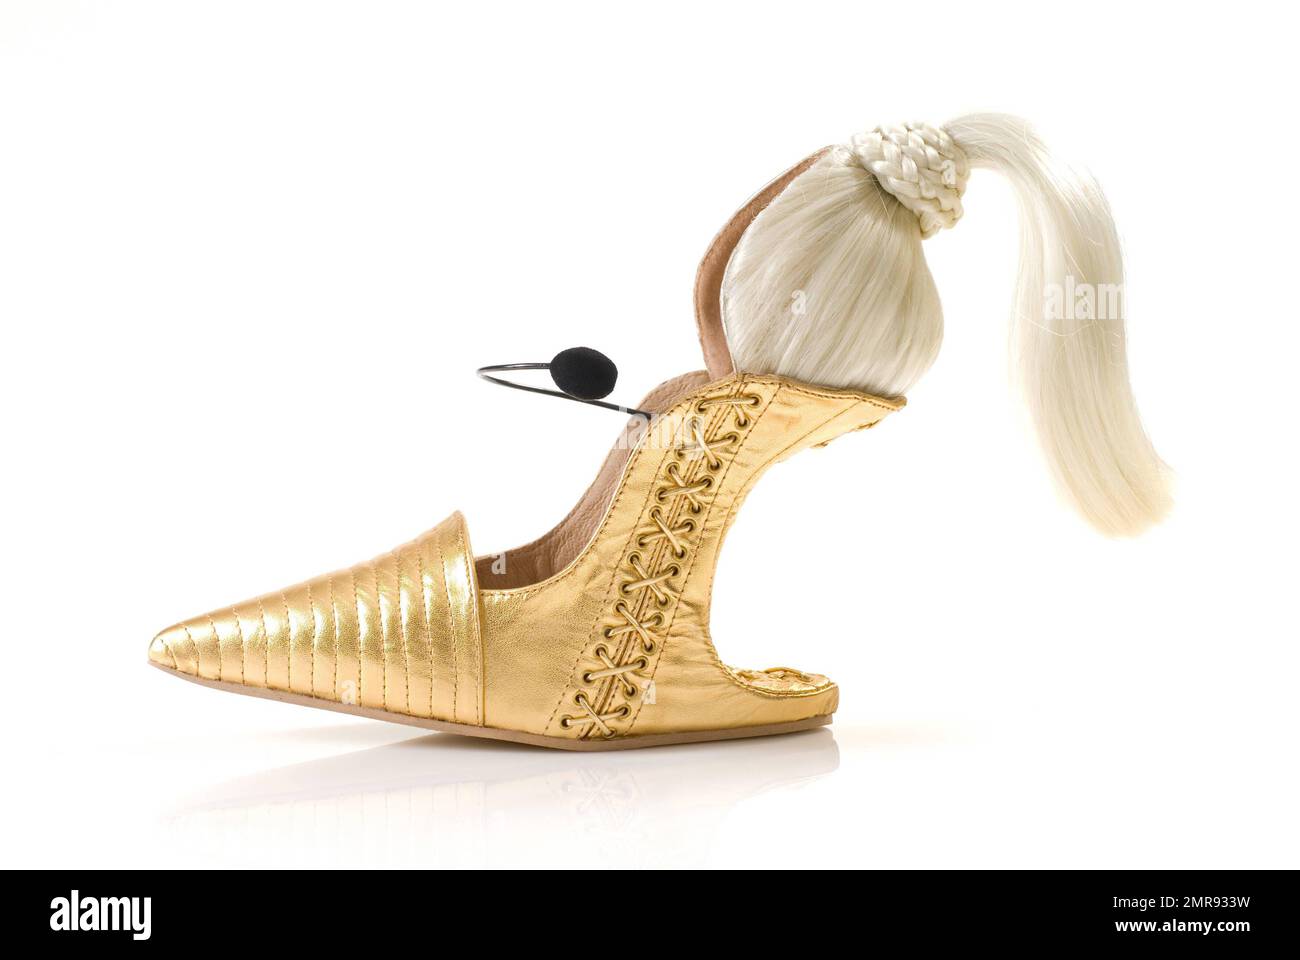 Designer Kobi Levi brings to life wearable shoe art with his Hybrid Collection that Lady Gaga a for her money! His designs ordinary high heels into one of